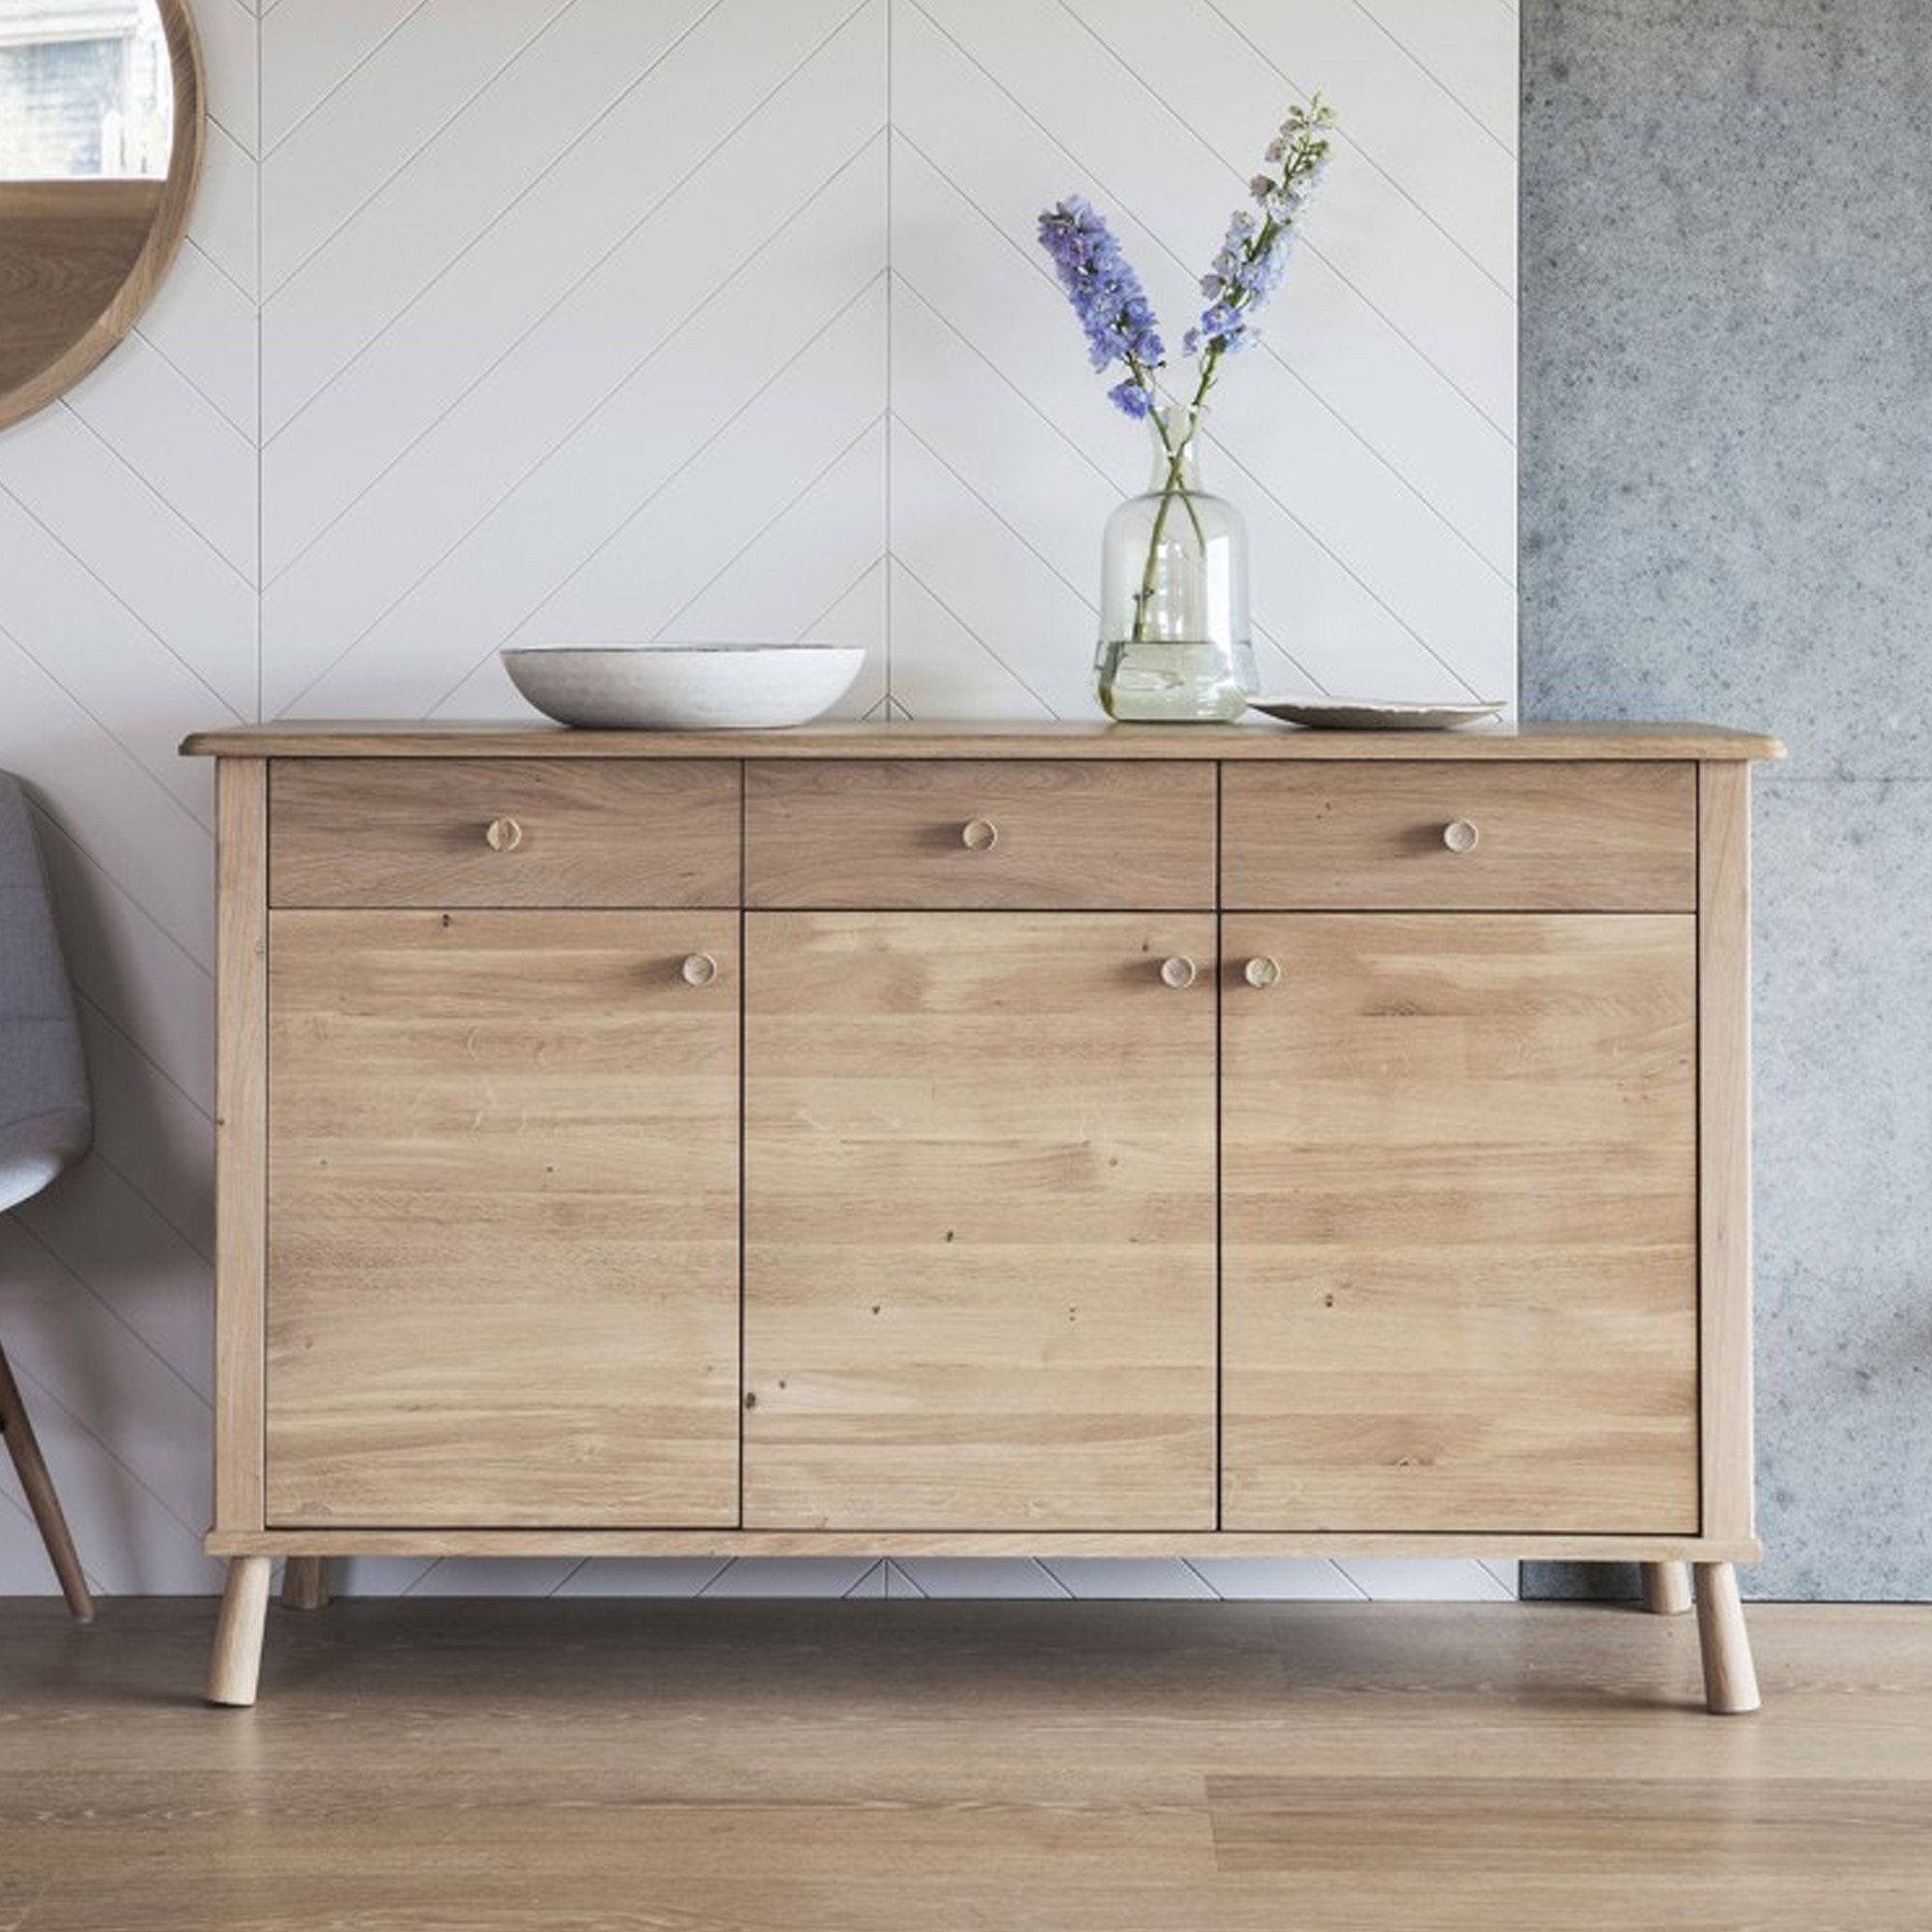 Wycombe 3 Door 3 Drawer Sideboard | Wooden Sideboards With Storage Throughout 3 Drawer Sideboards (Gallery 6 of 20)